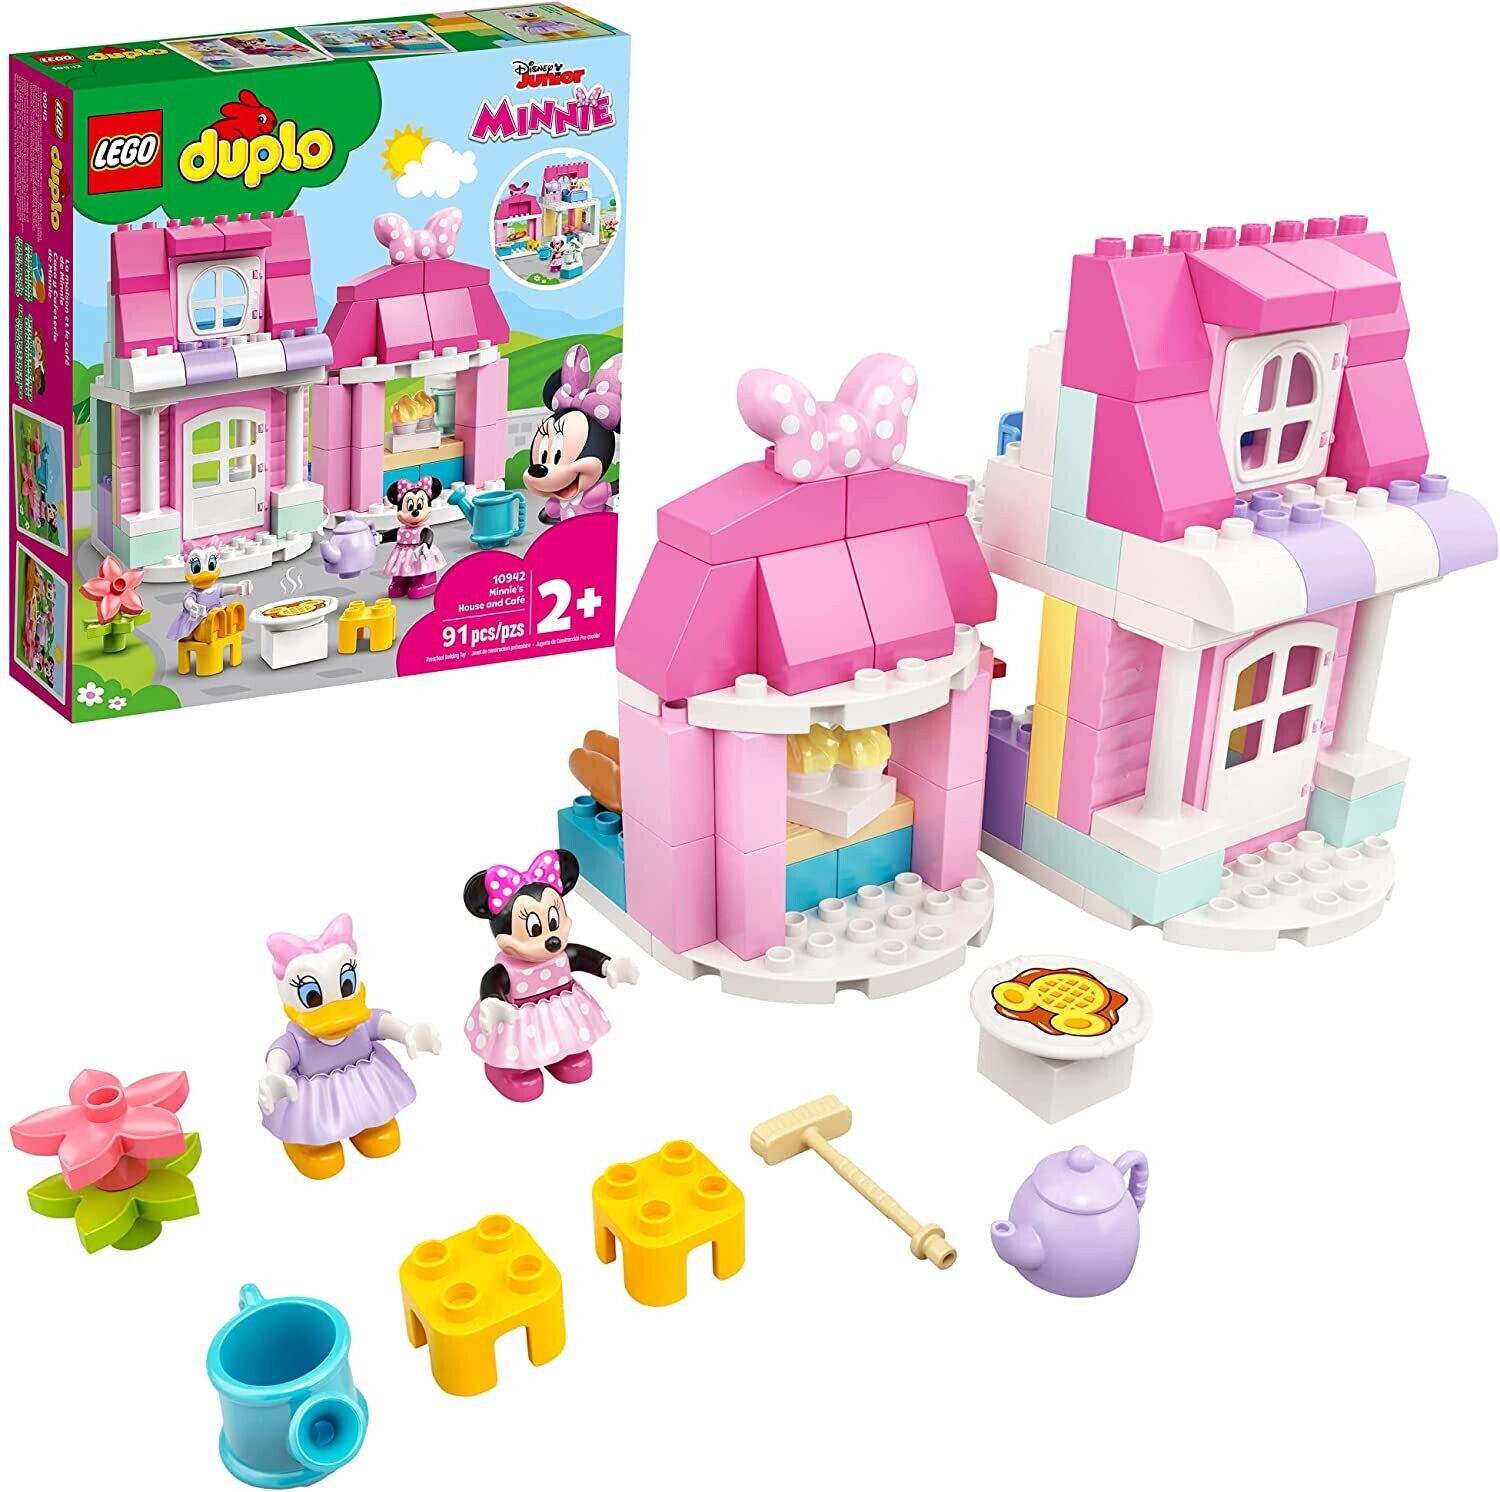 Lego 10942 Duplo Minnie's House and Cafe'